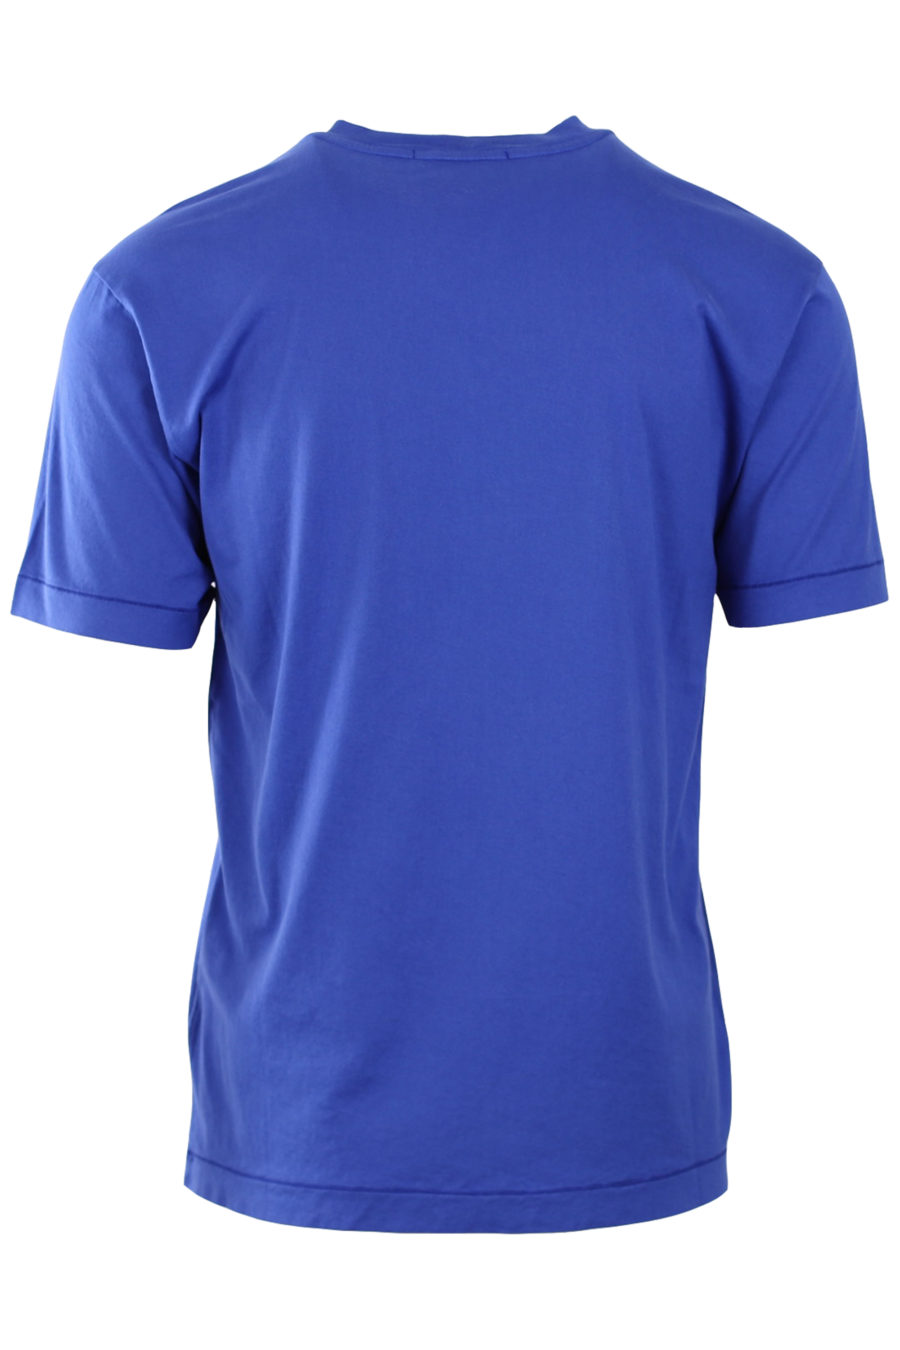 Blue T-shirt with brand patch - dcc775abd52becea25ae950542b09c8b7834d75f